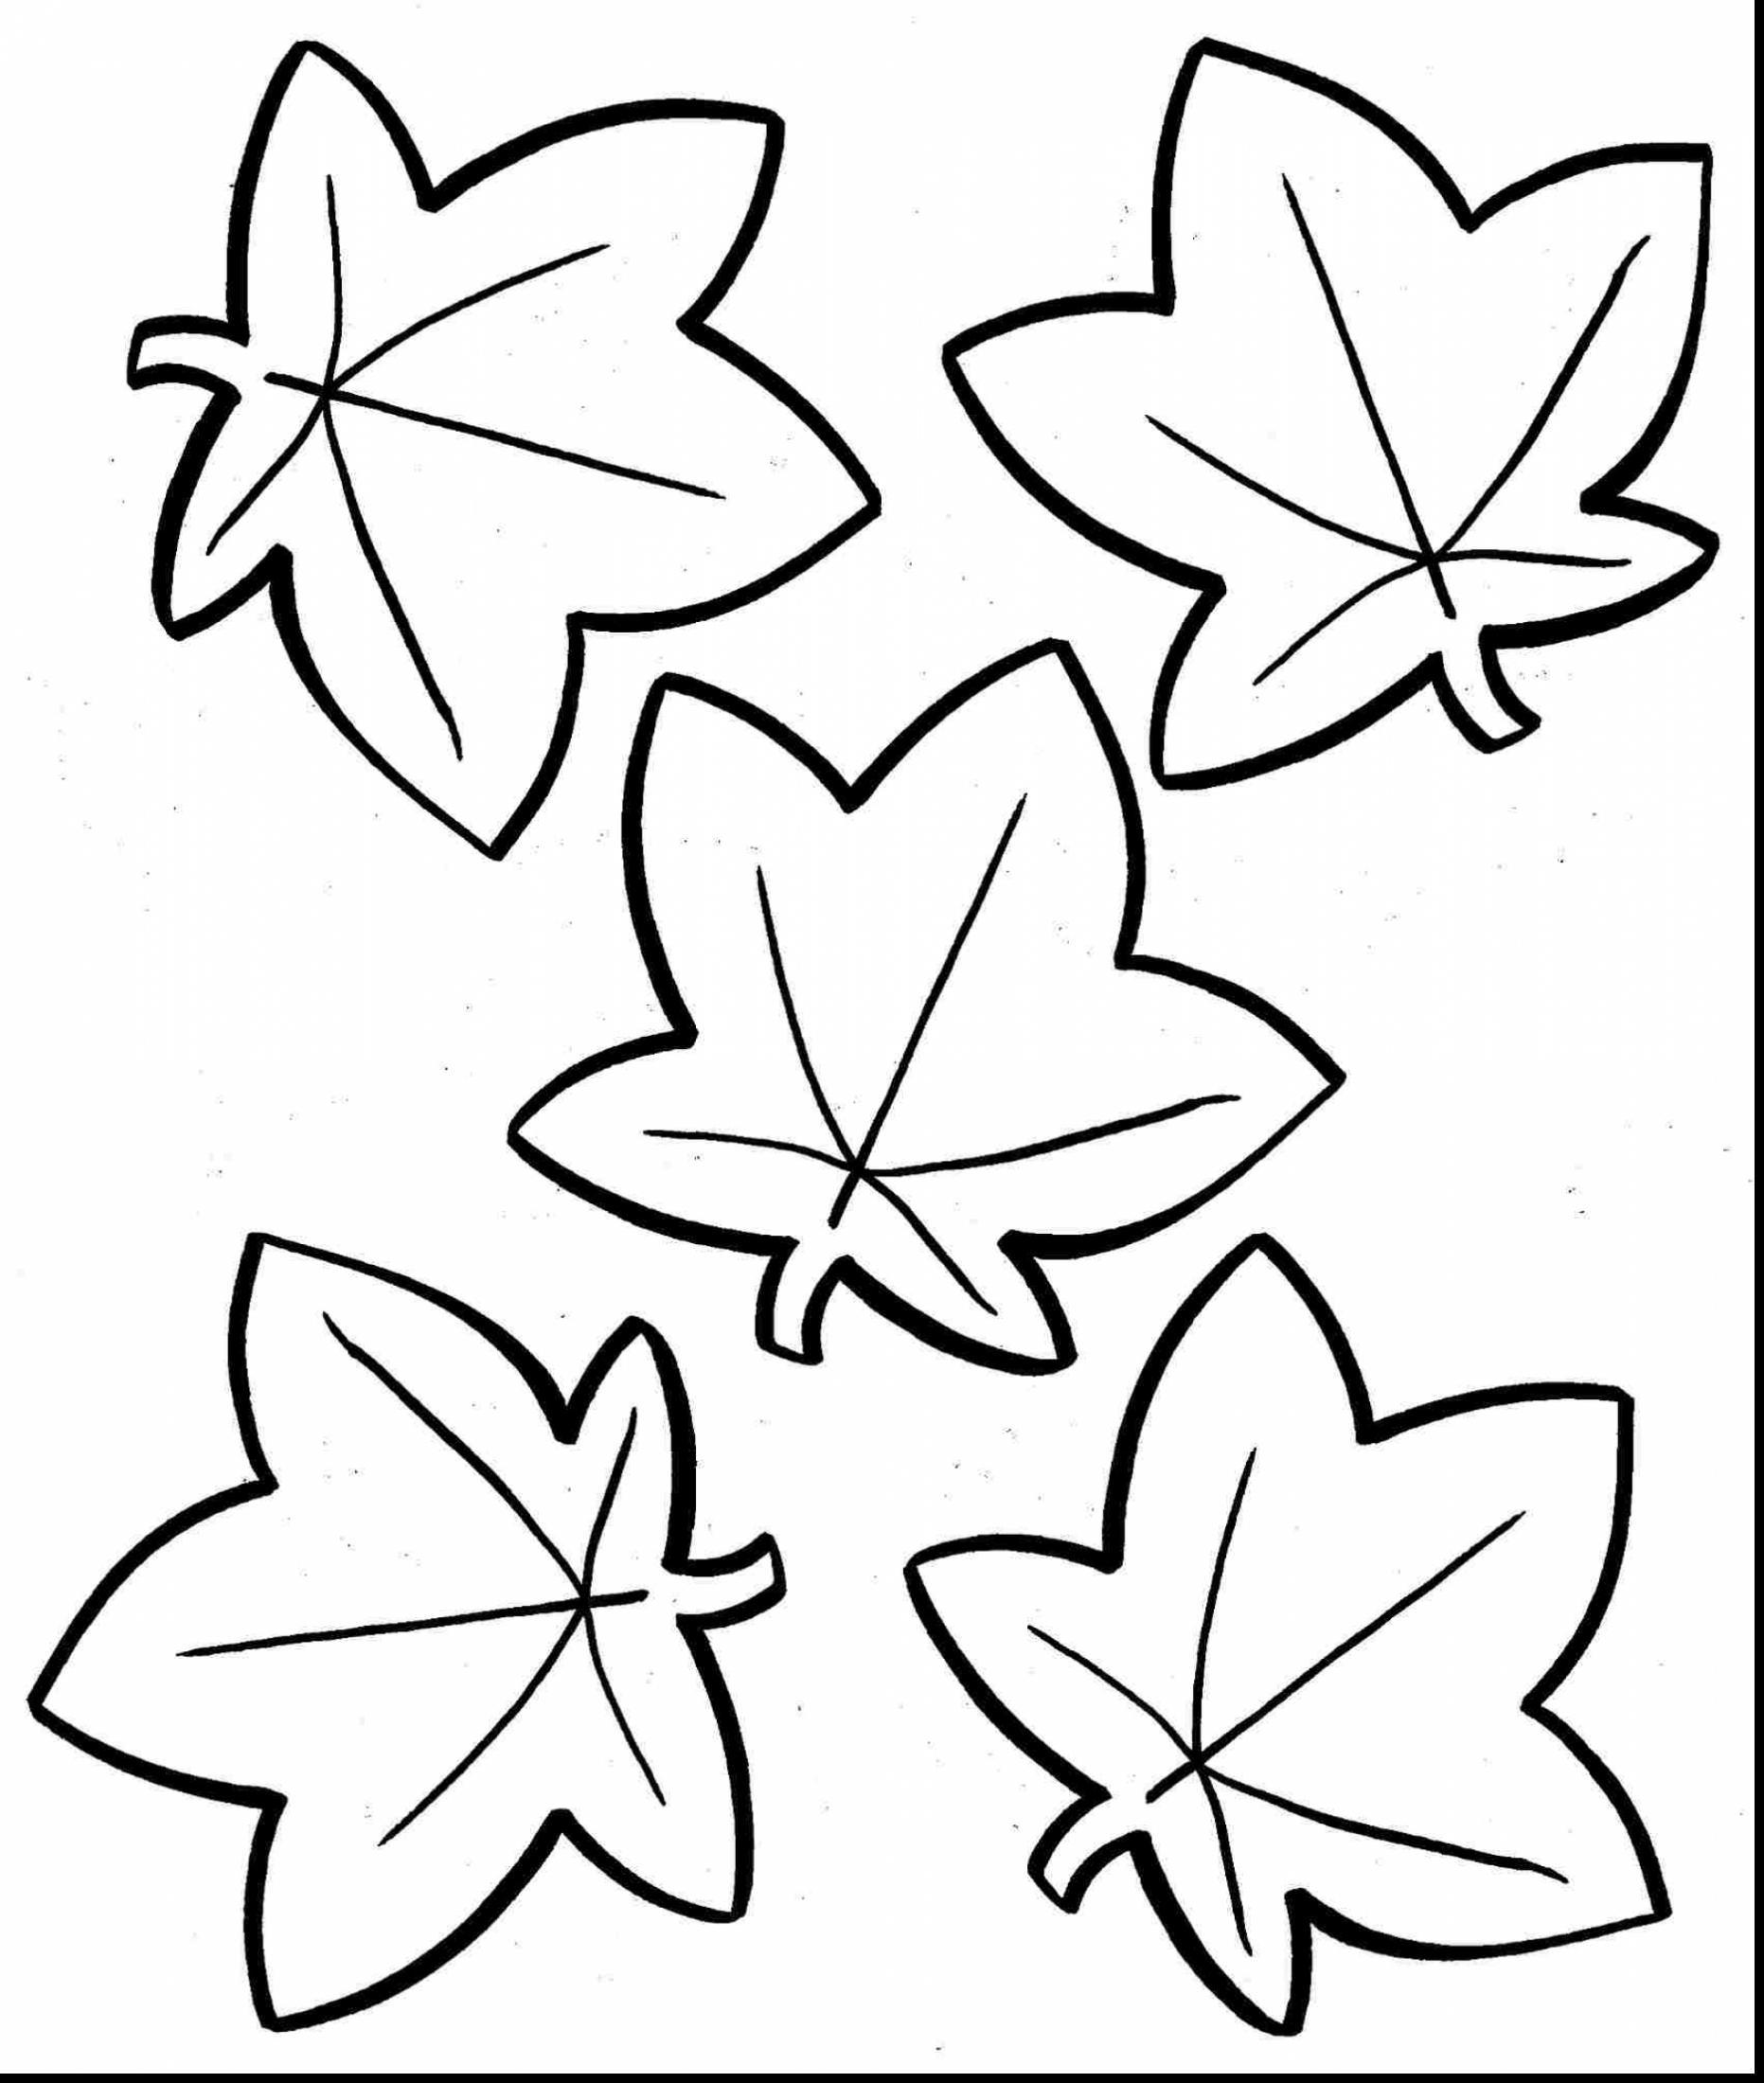 Pumpkin Leaves Drawing Free download on ClipArtMag